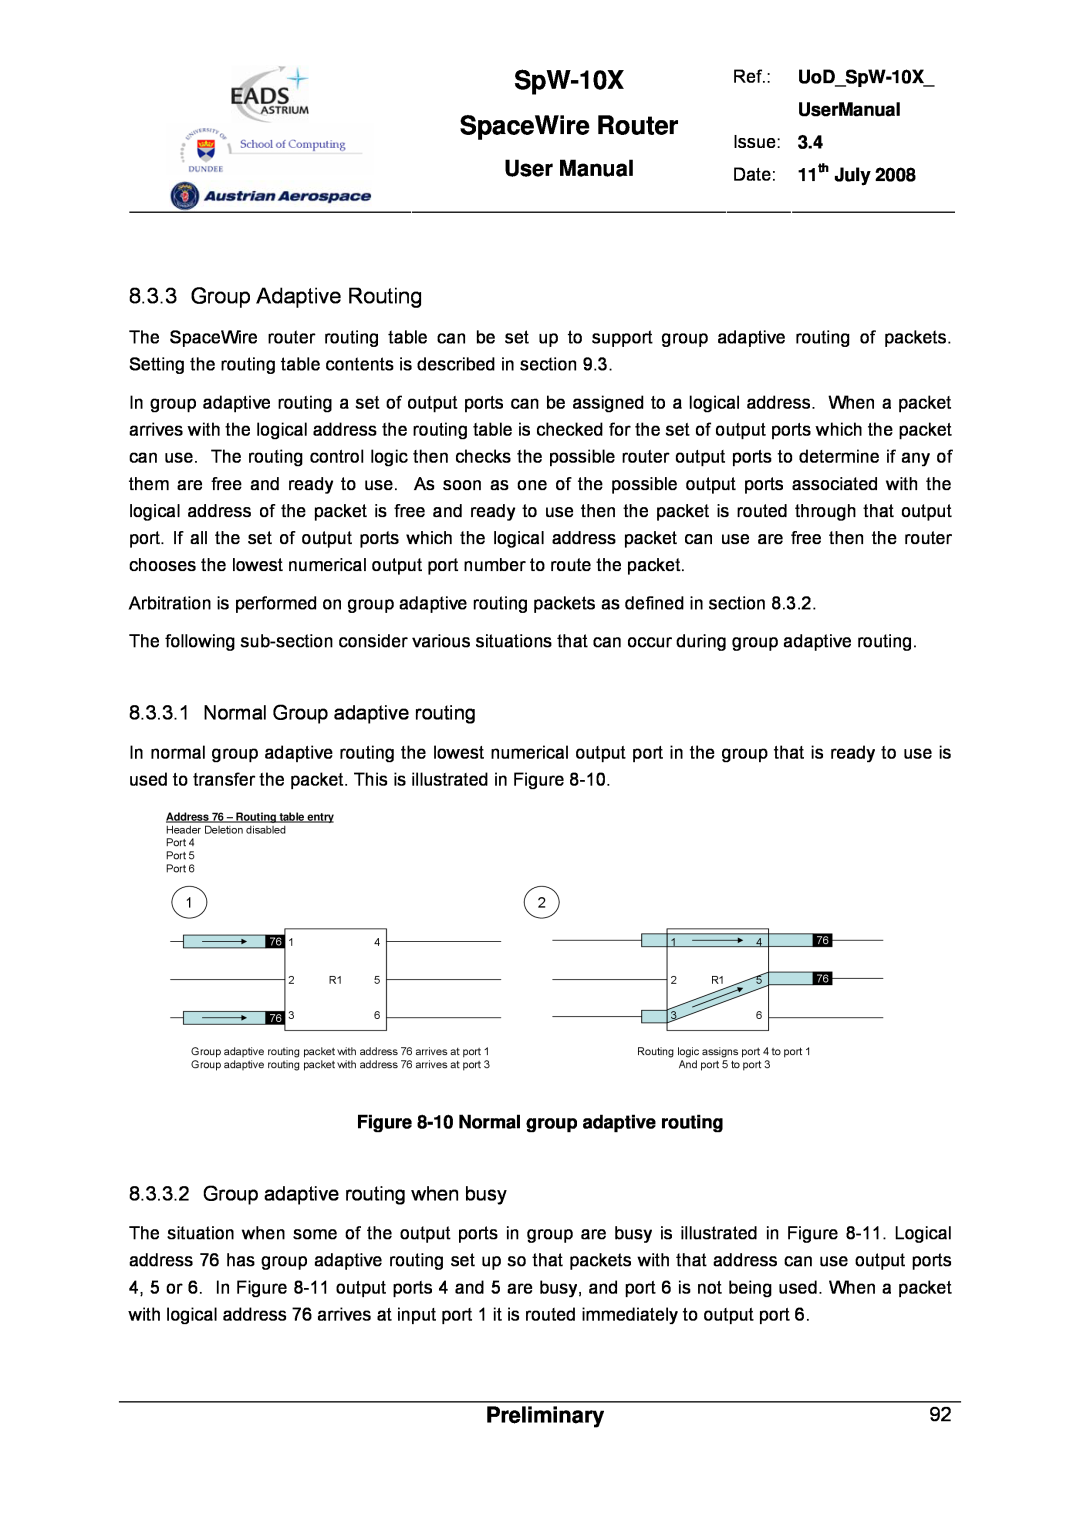 Atmel SpW-10X Group Adaptive Routing, Normal Group adaptive routing, Group adaptive routing when busy, SpaceWire Router 